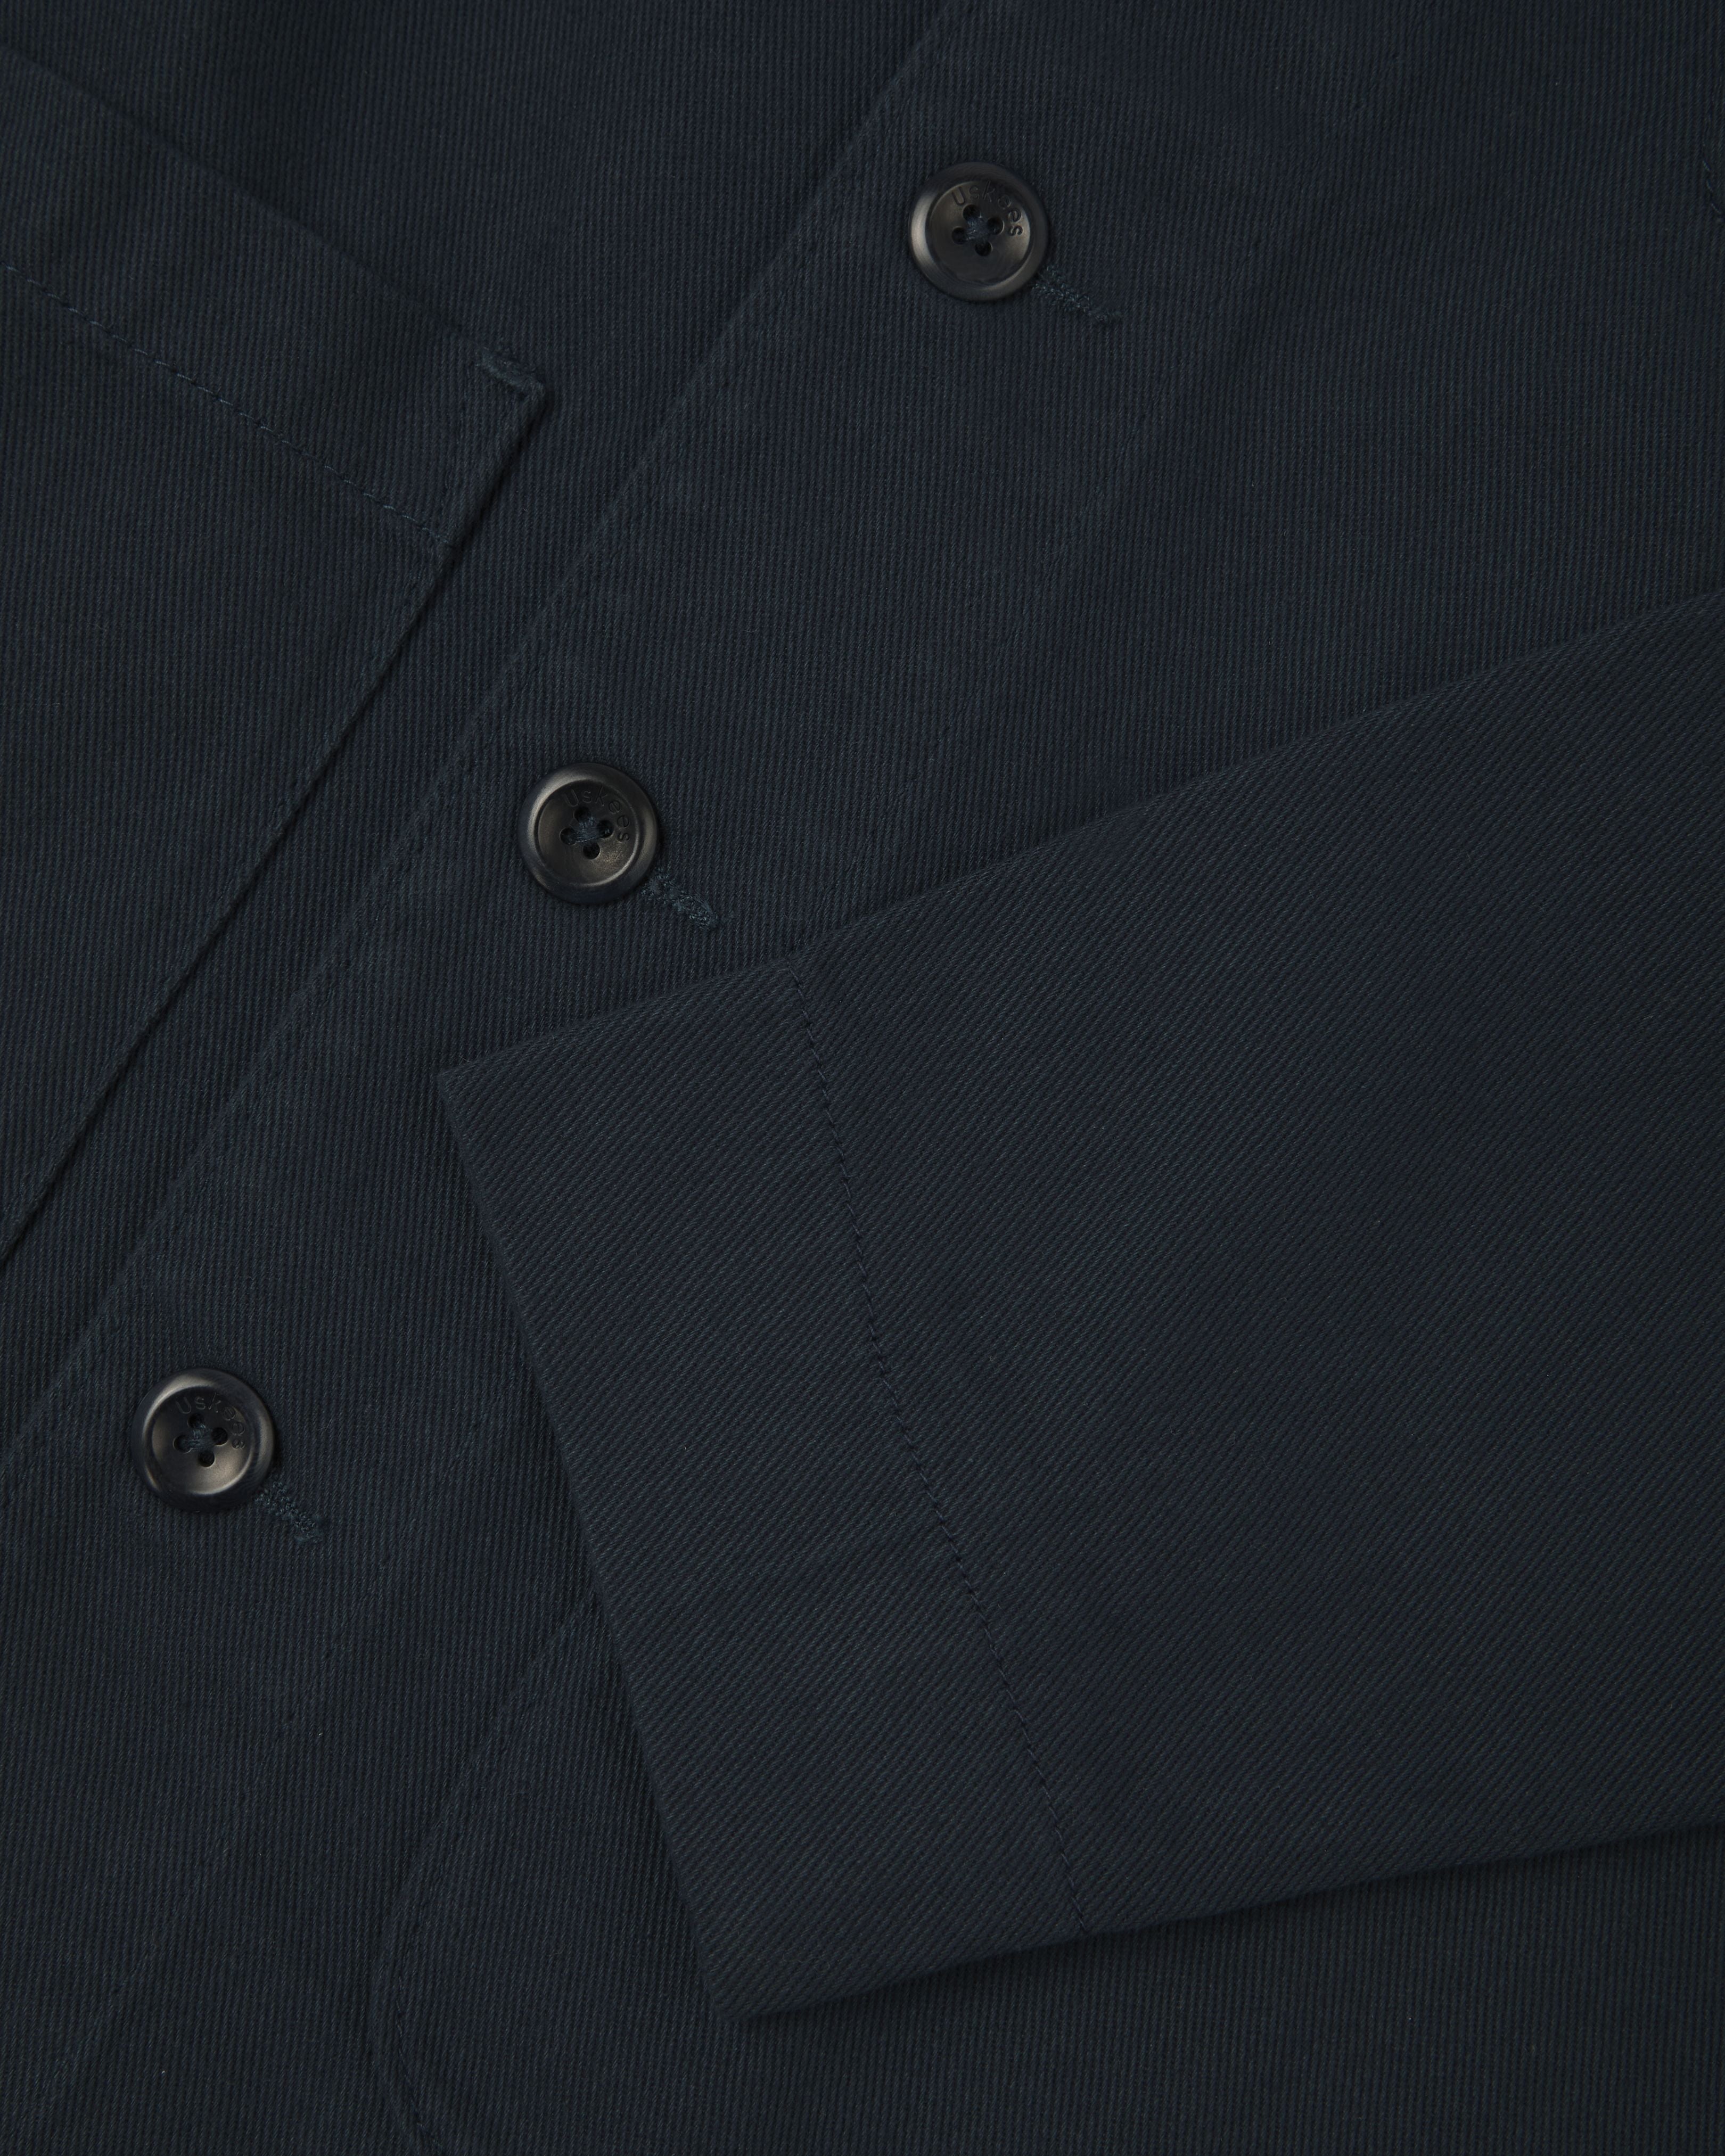 Close up view of dark blue organic cotton drill commuter blazer showing front buttons and cuff detail